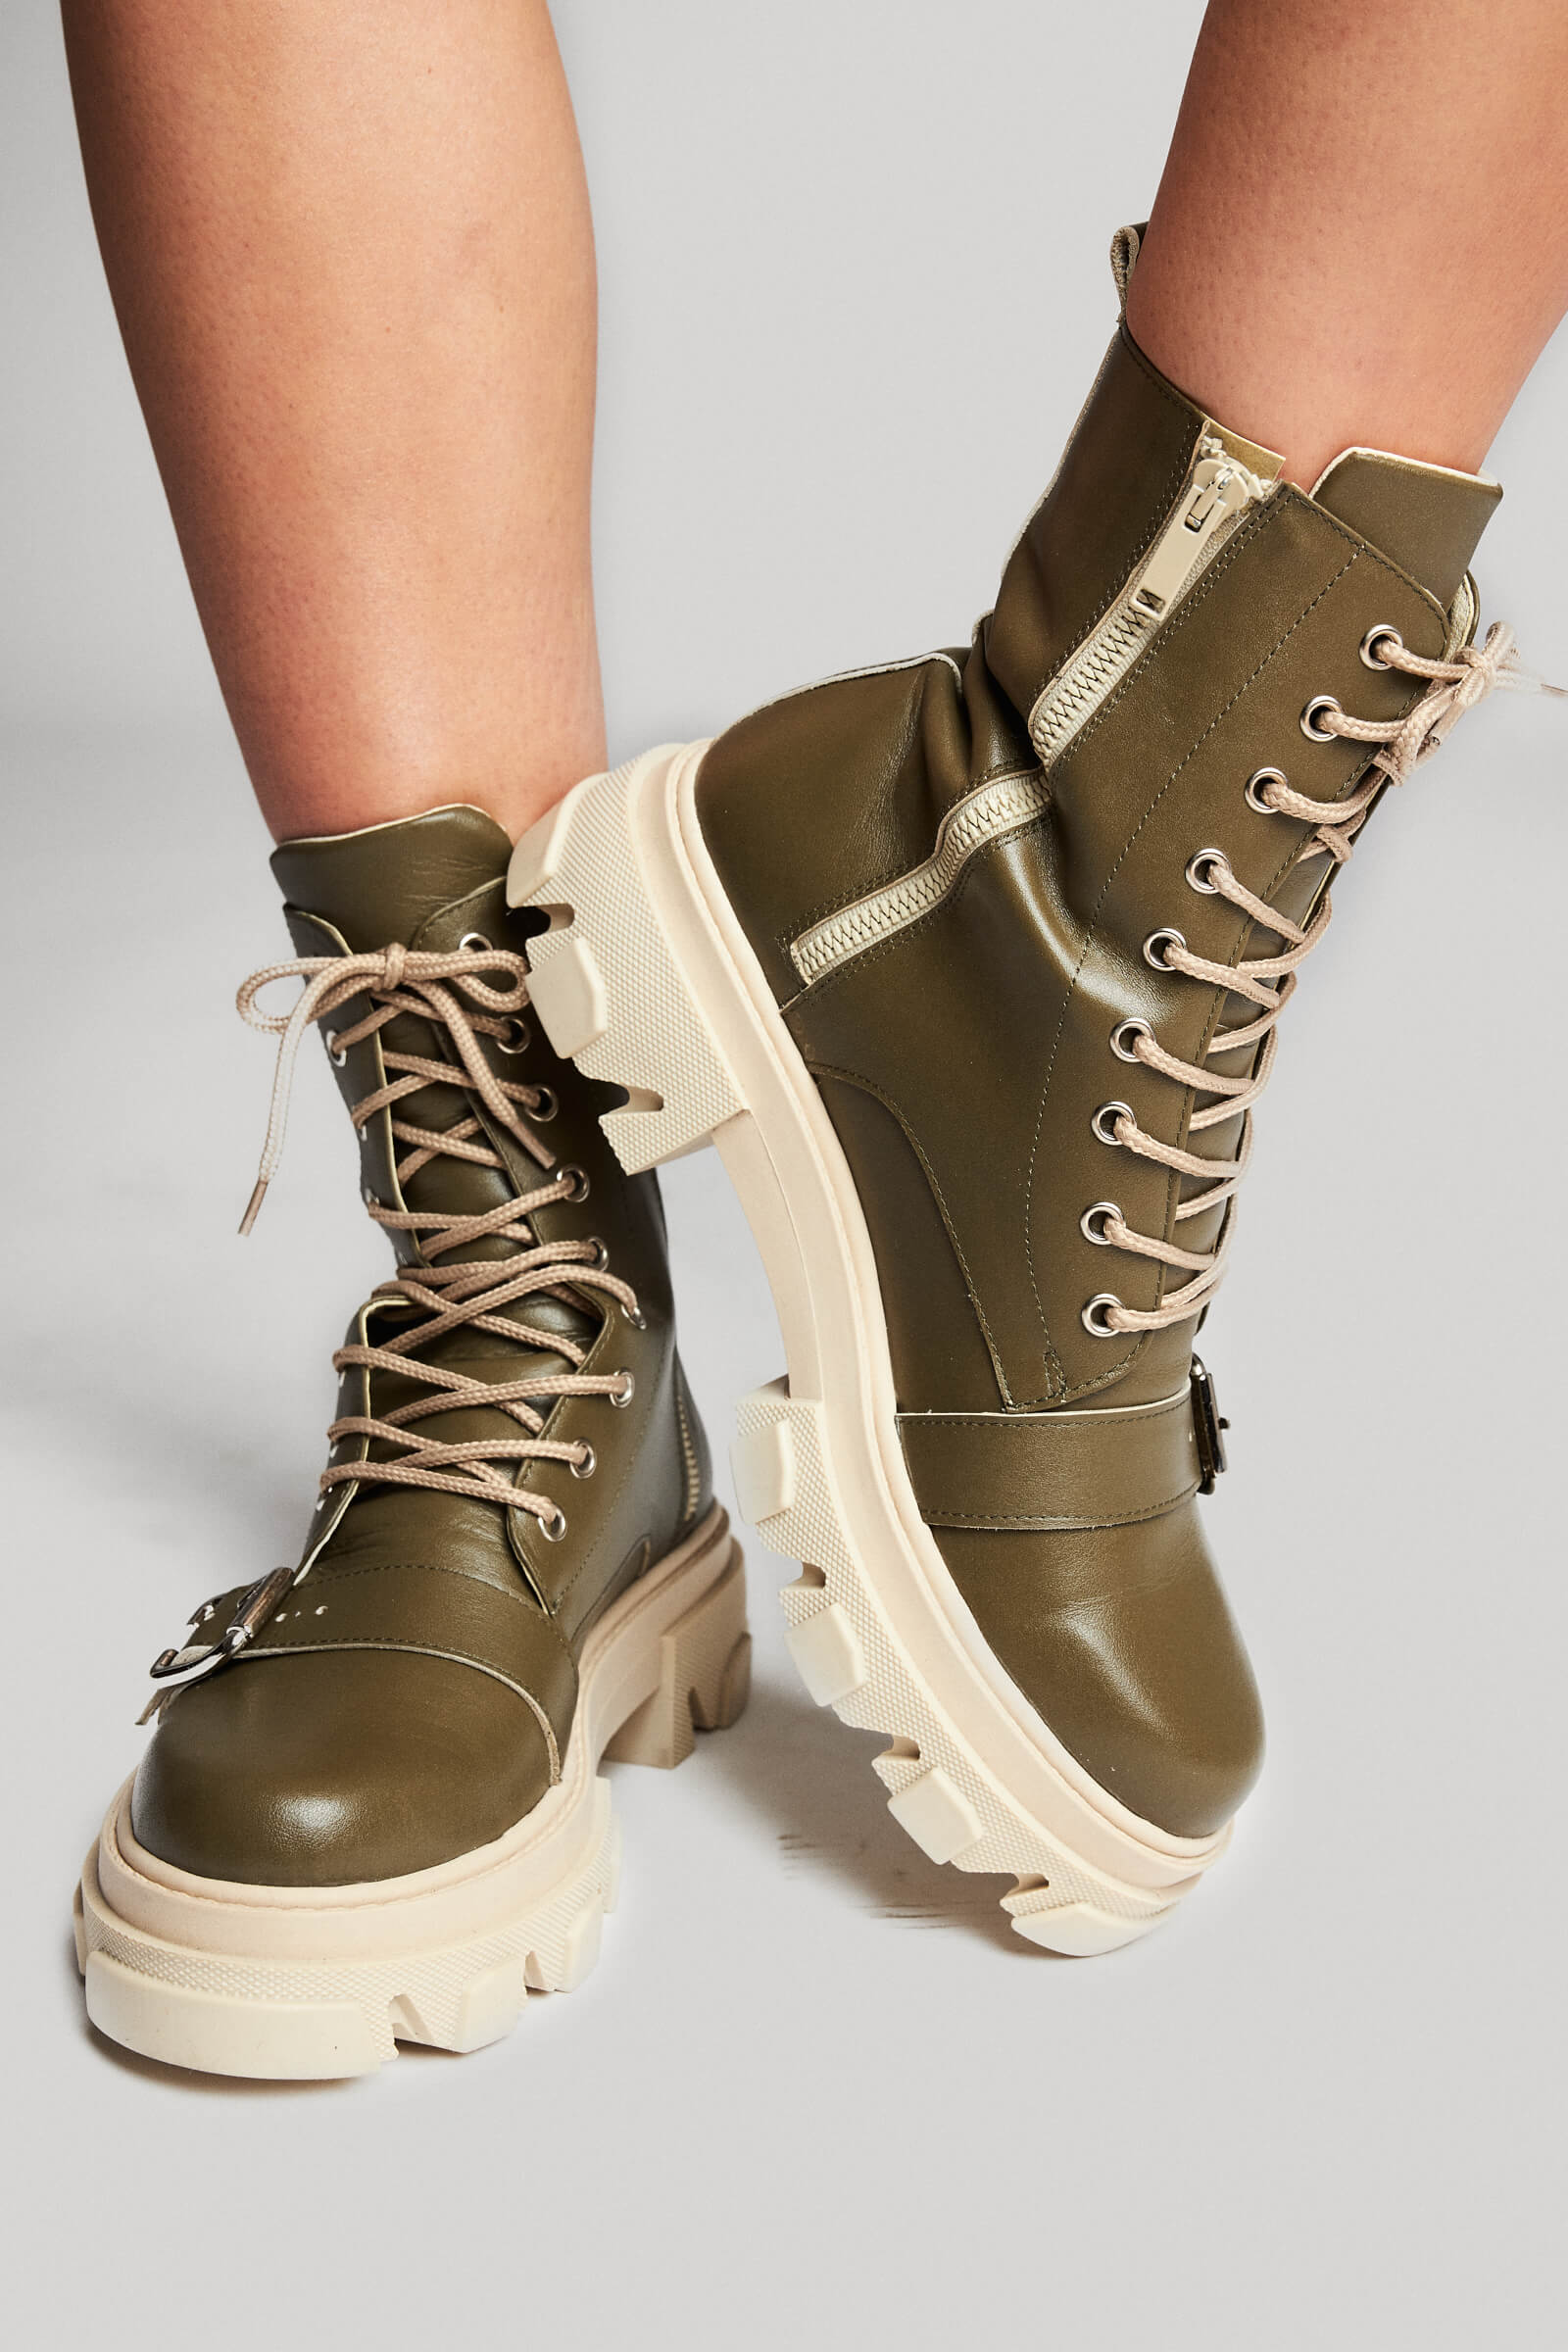 Buckle up, soldier! We're enrolling in the army of well-played outfits! You can never go wrong with a good pair of combat boots and in this olive shade too?! This season olive green is the new black, for sure!